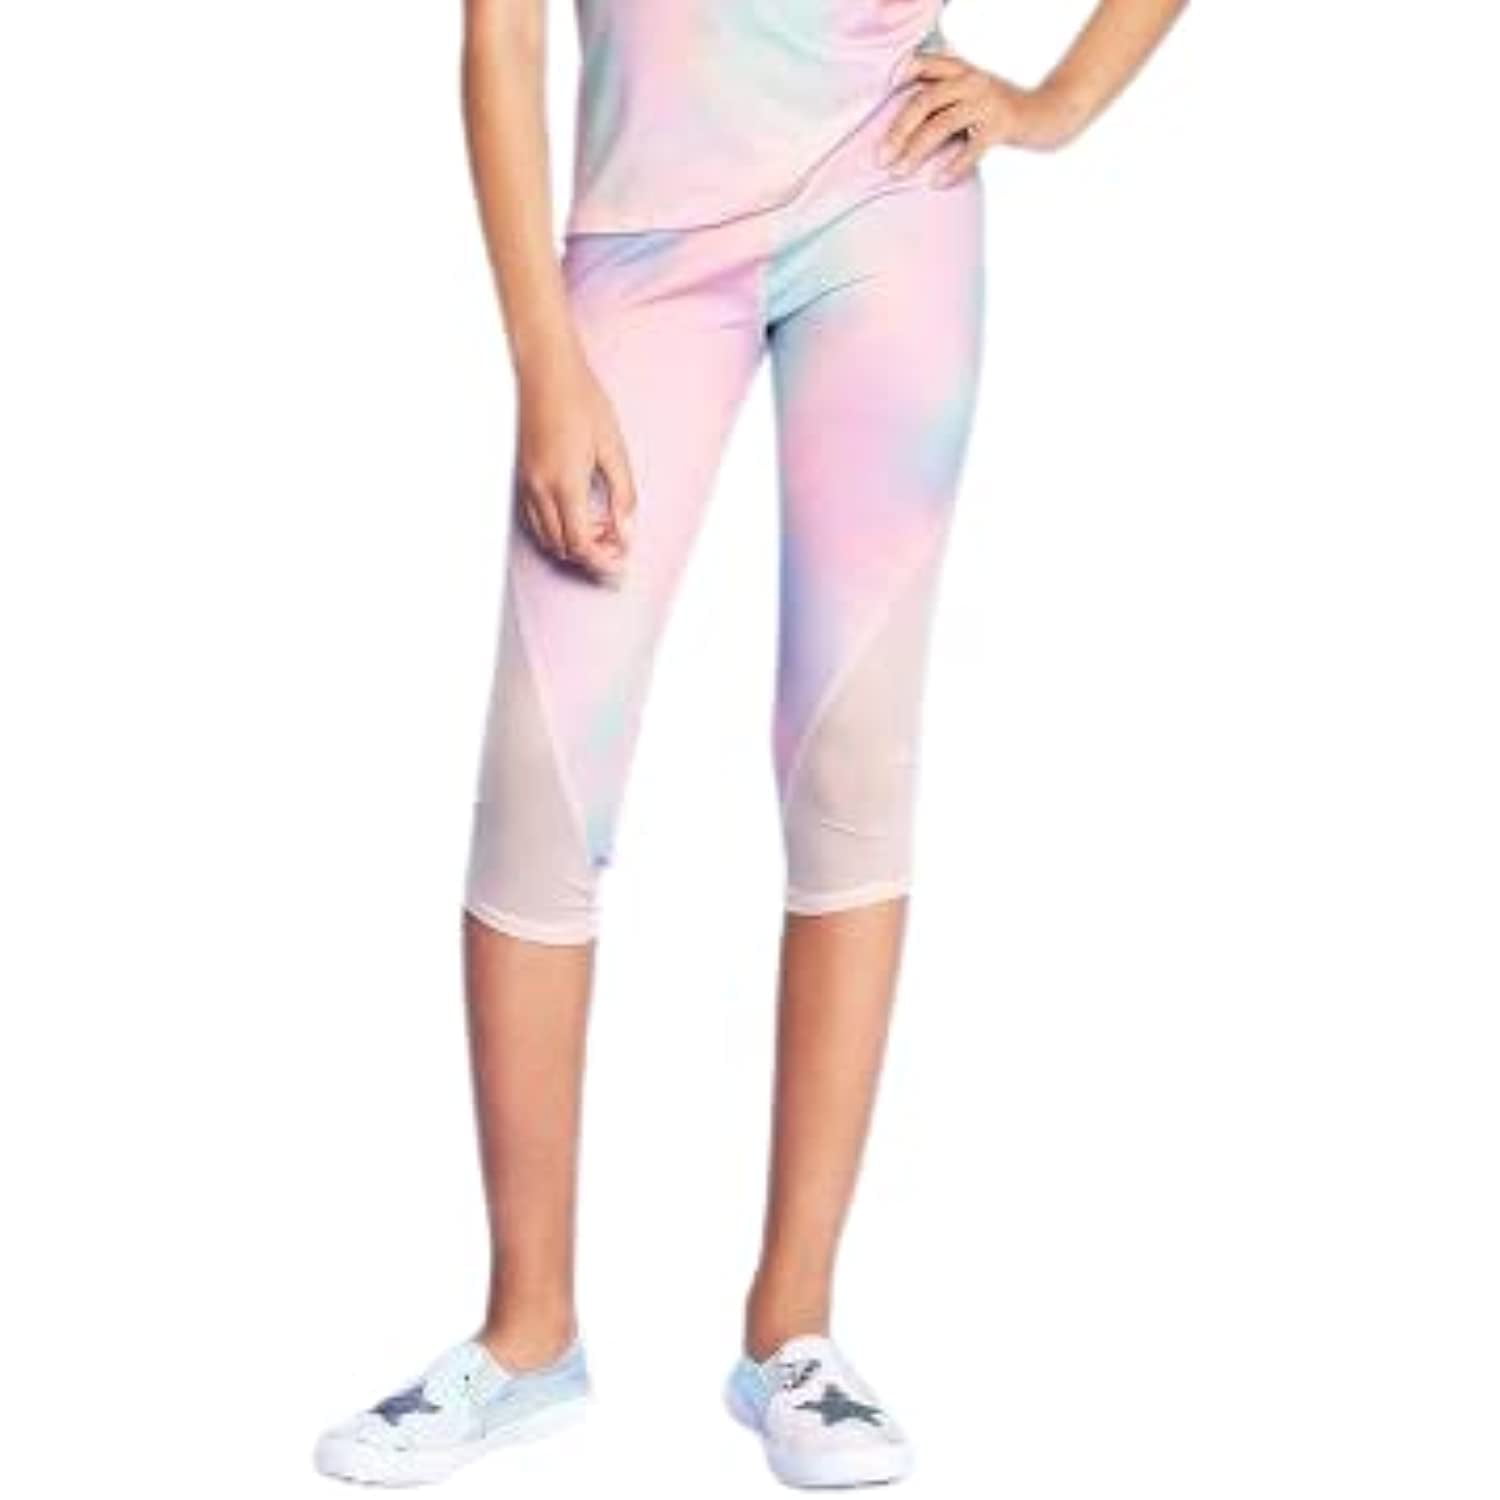 More Than Magic Girls Activewear Cropped Mermaid Pink Ombre Leggings 